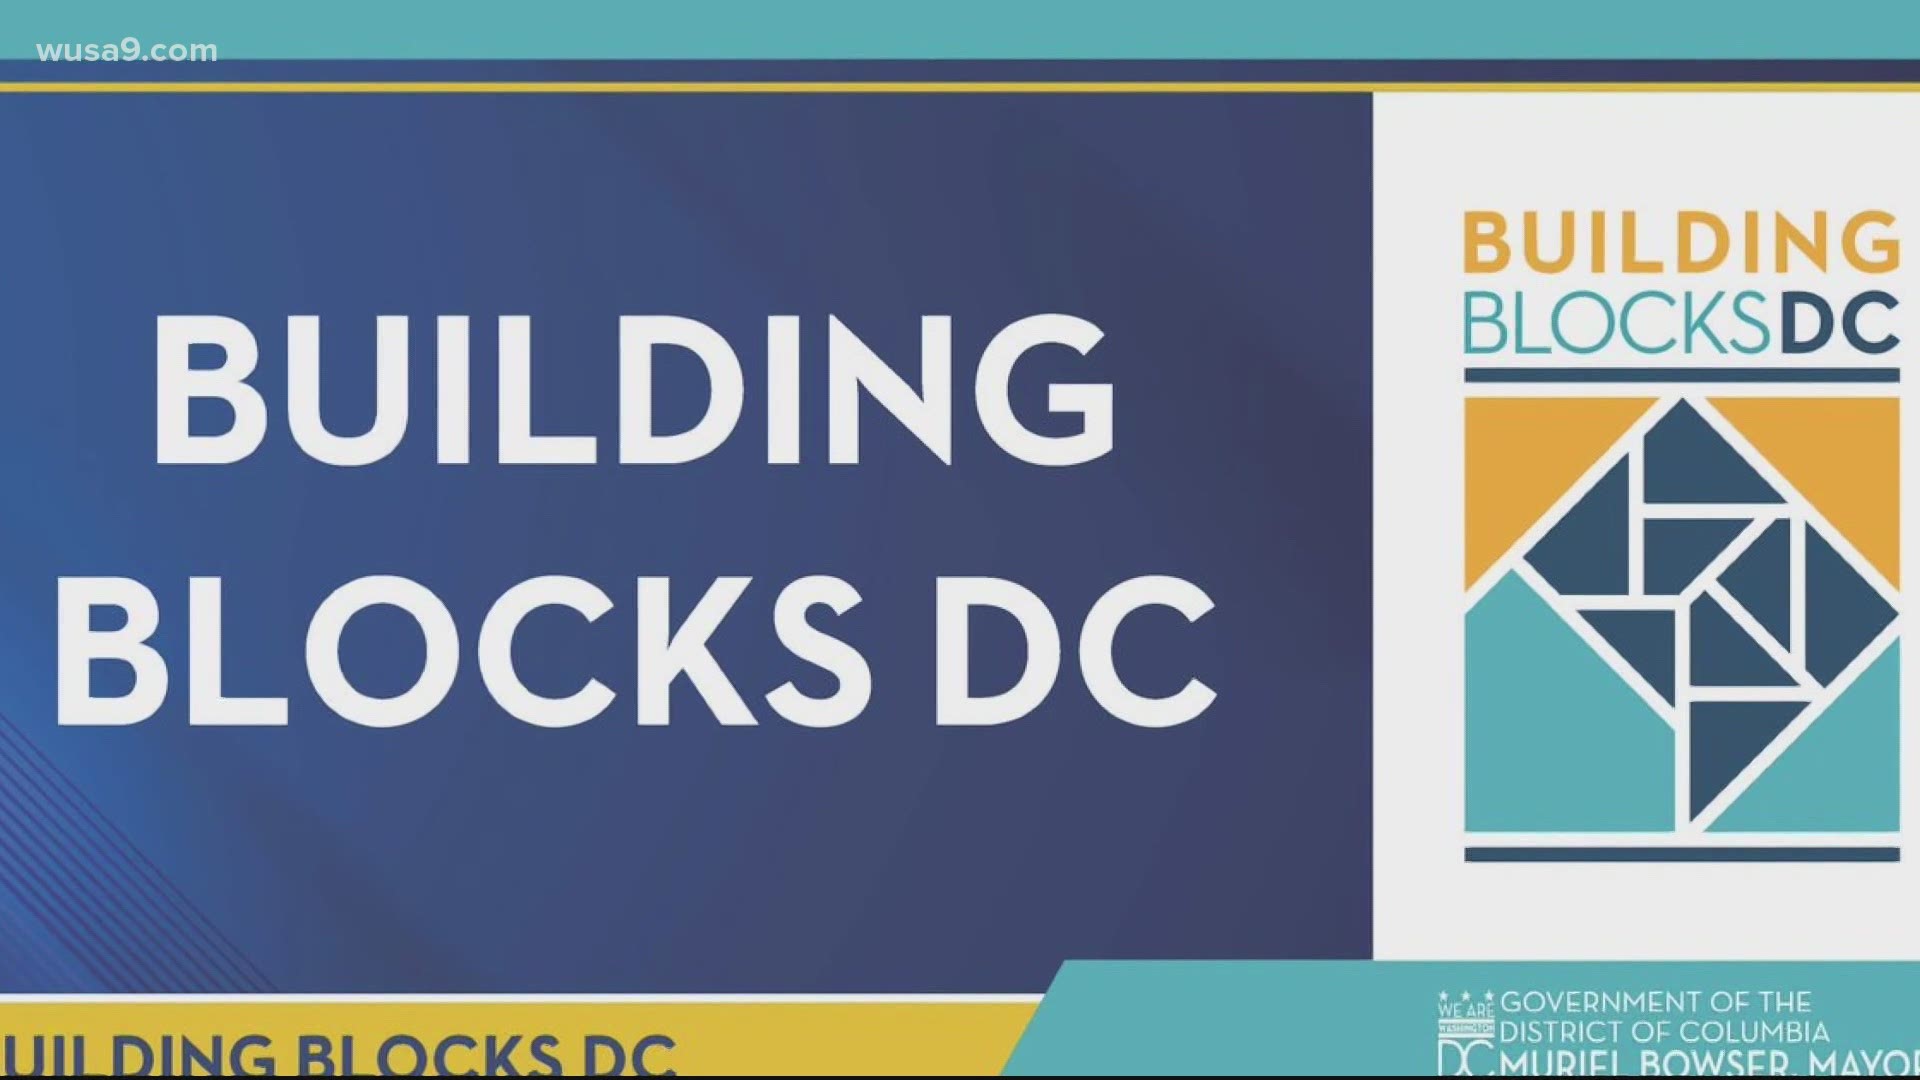 DC's Building Blocks program will take a public health approach to prevent violence.